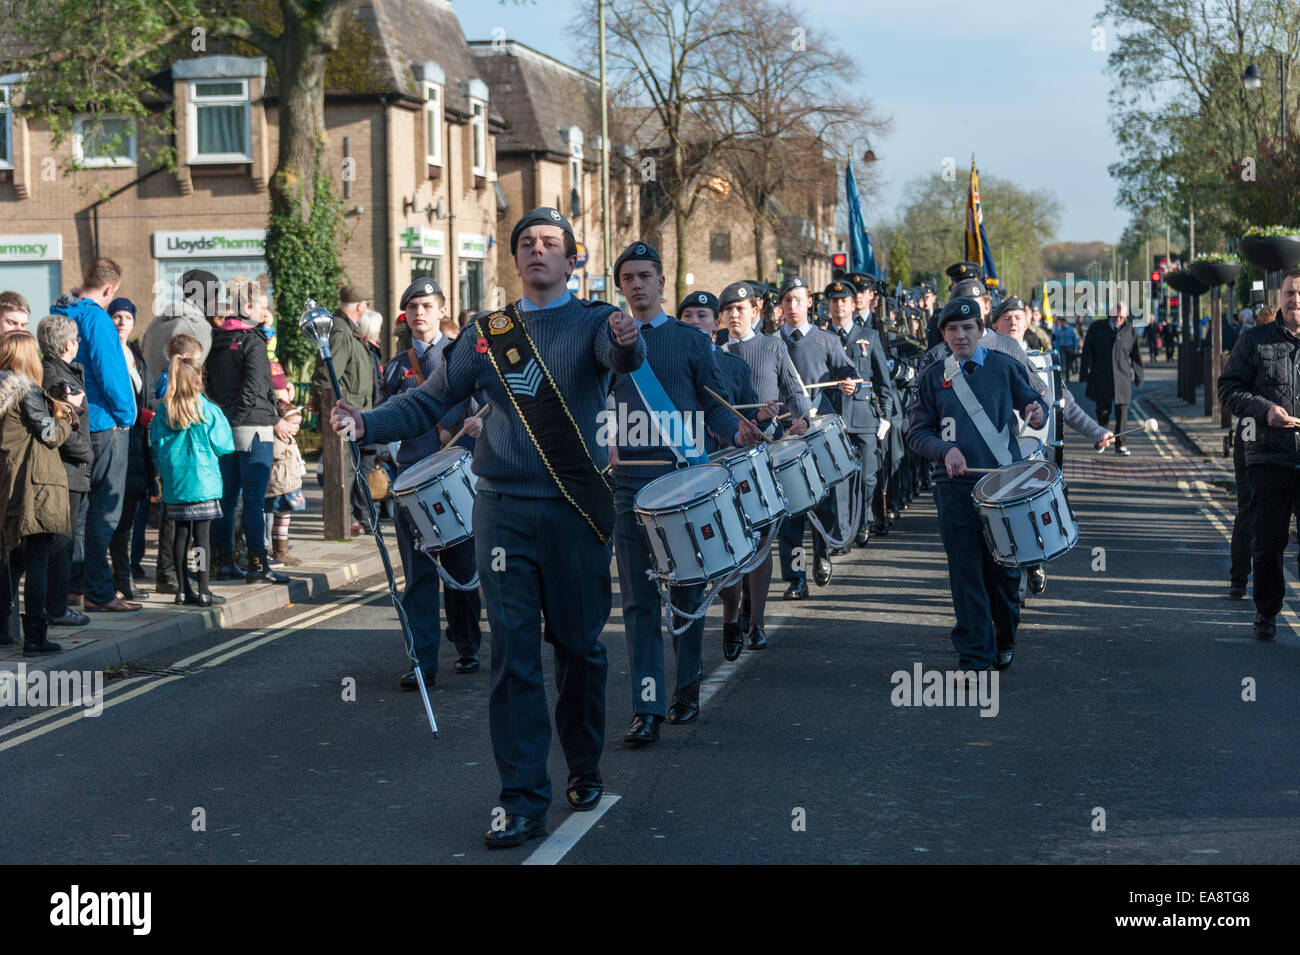 Carterton, Oxfordshire, UK. 9th November, 2014. Members of 2267 (Brize Norton) Sqn Air Training Corps Play during the Remembrance Sunday Parade in Carterton Oxfordshire. RAF Brize Norton whas played such a vital role in recent and onging missions. Credit:  Desmond Brambley/Alamy Live News Stock Photo